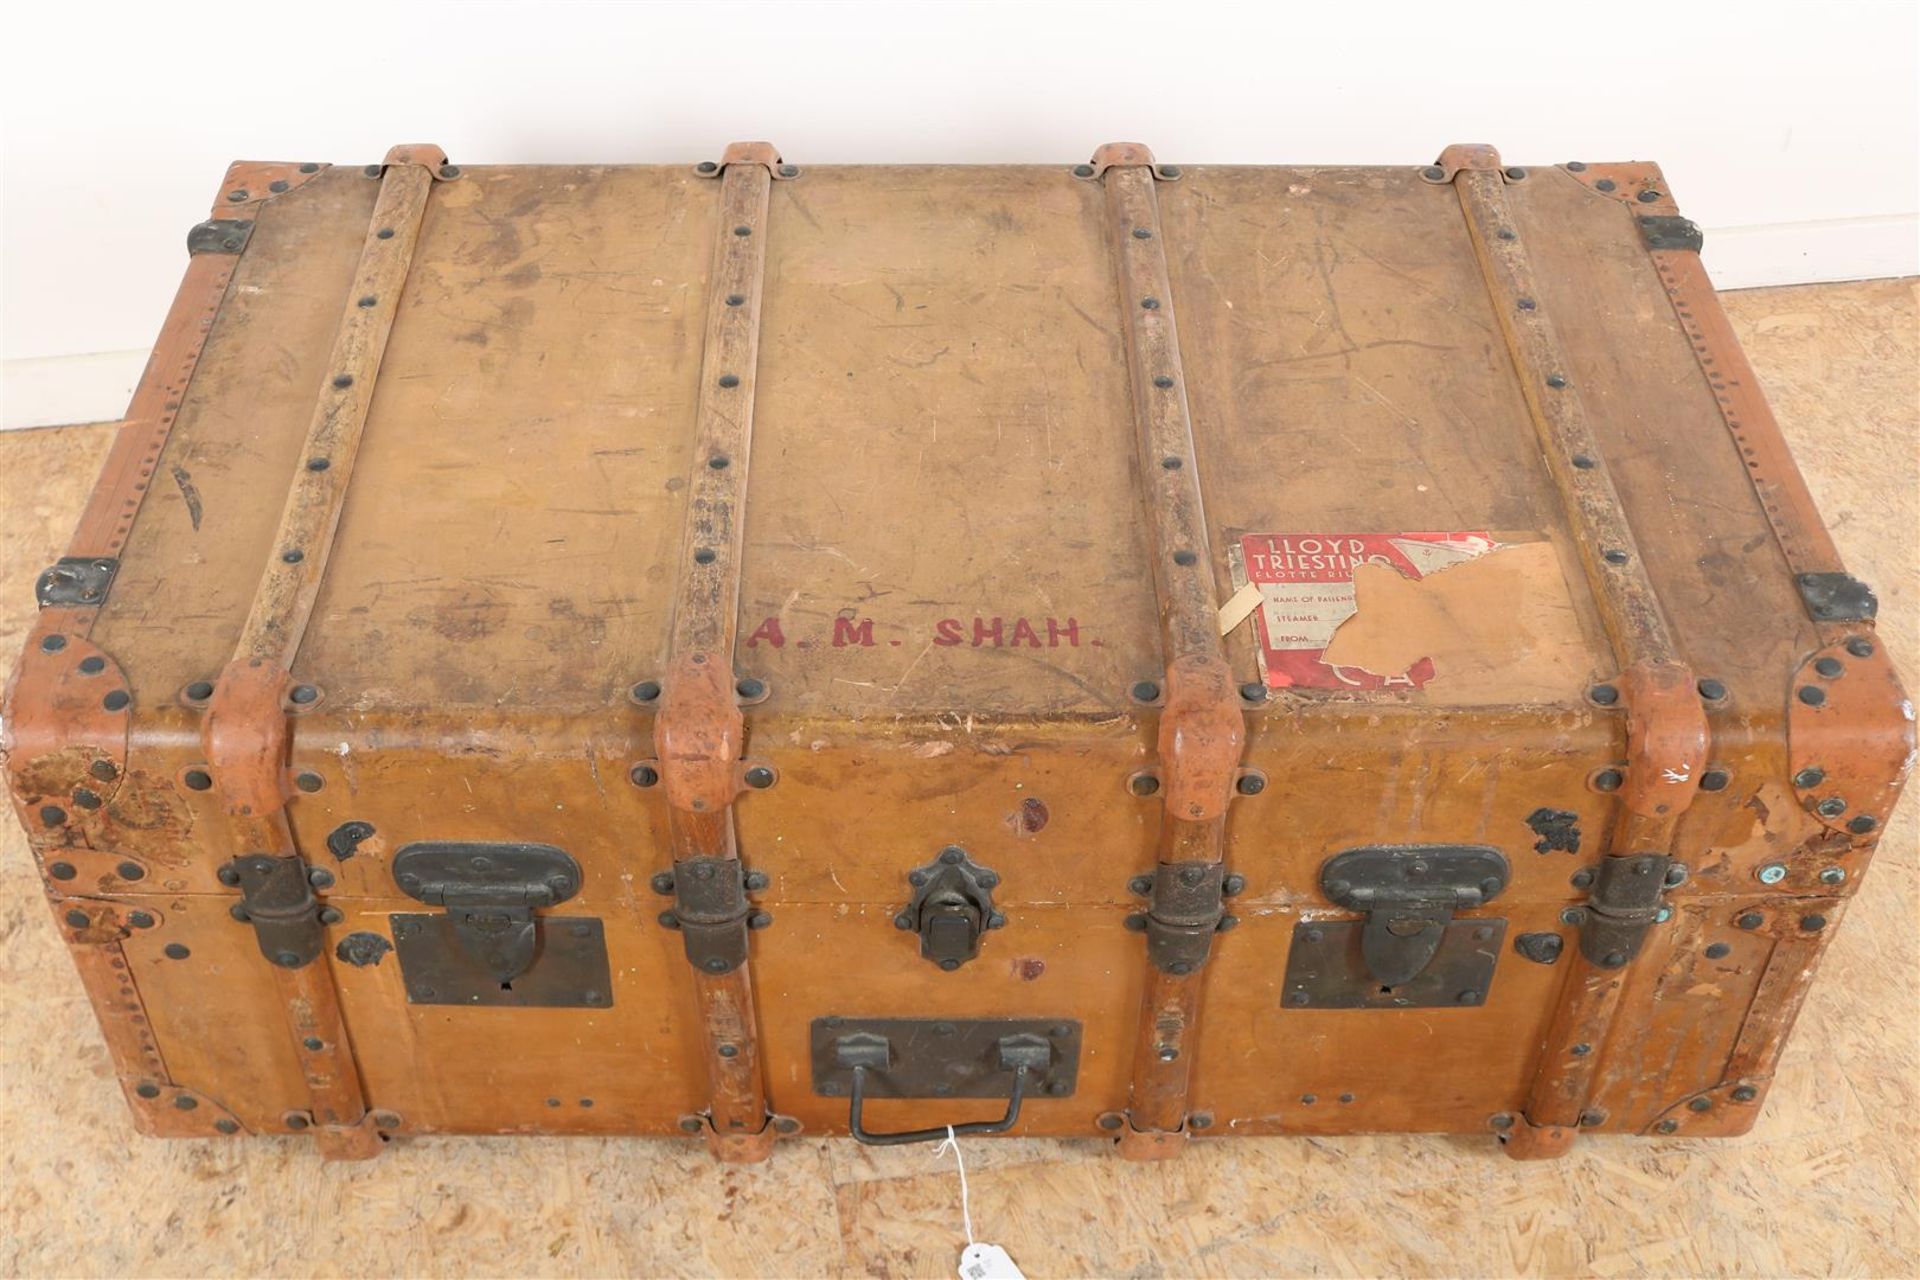 Travel suitcase with cognac-colored leather and brass fittings, France, 1920s, 34 x 90 x 54 cm. - Image 3 of 5